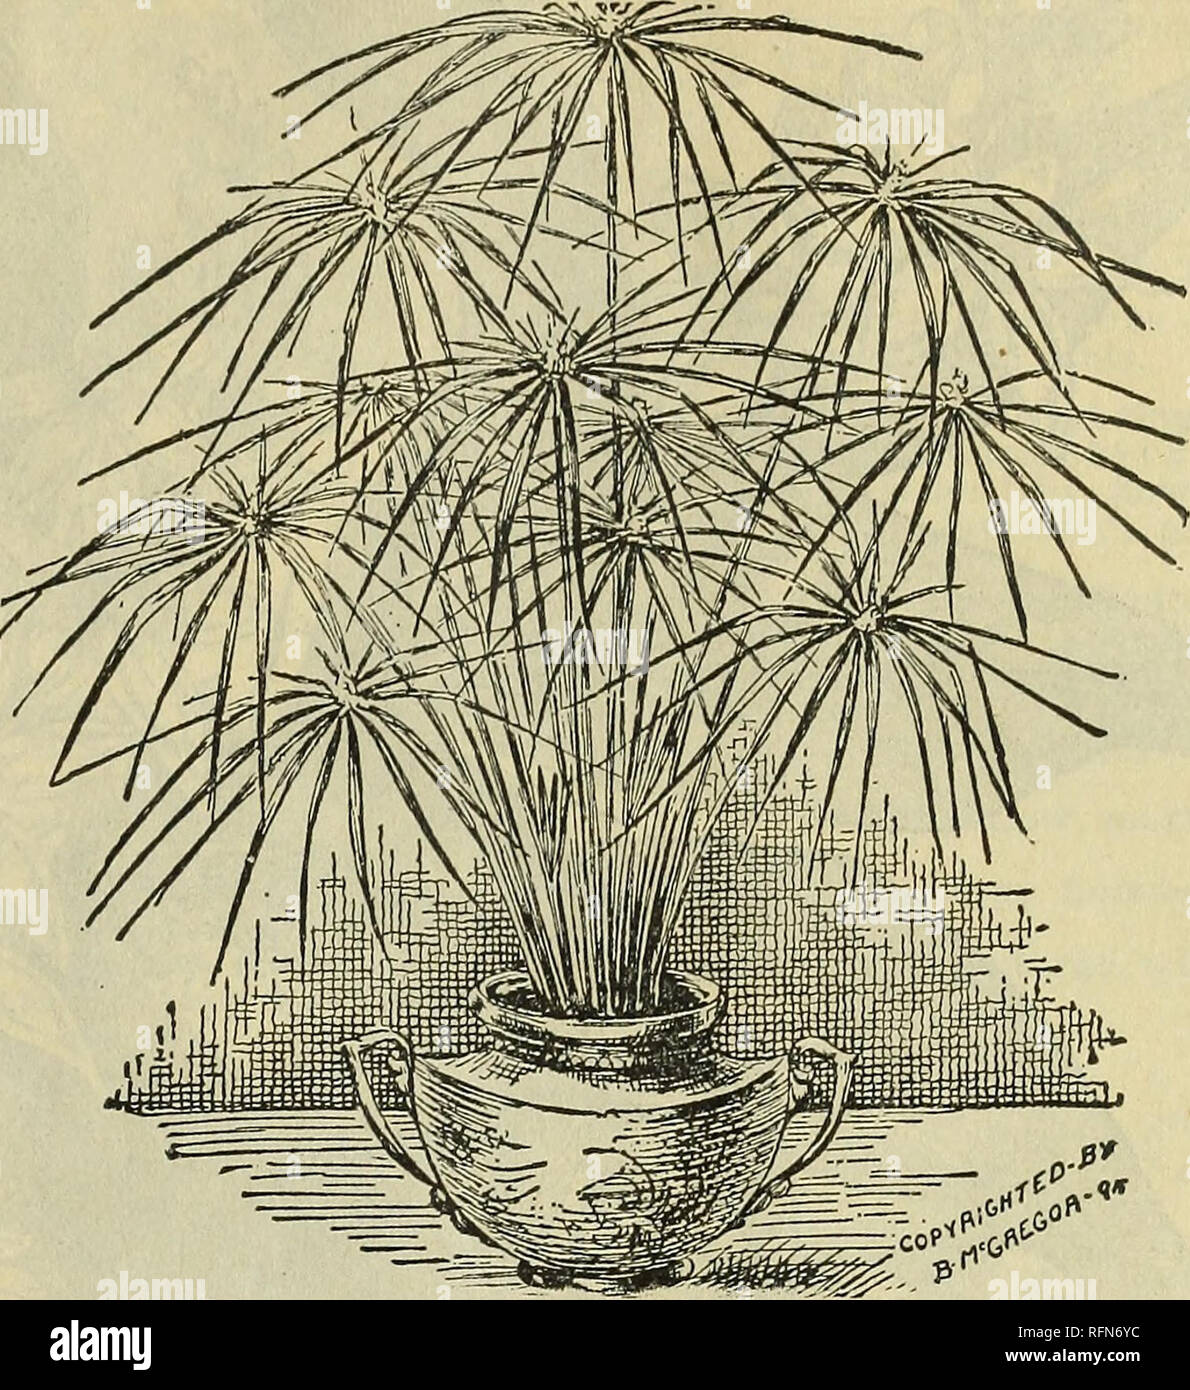 . Floral gems for winter flowering. Flowers Seeds Catalogs; Bulbs (Plants) Catalogs; Plants, Ornamental Catalogs; Commercial catalogs Ohio Springfield. Grevlllea, the Australian Silk Tree. Umbrella Plant. (Cyperus Alternifolius.} UMBRELLA PLANT. (Cyperus Alternifolius.) An ornamental grass, throwing up stems about two feet high, surmounted at the top with a whorl of leaves, diverg- ing horizontally, giving it a very curious appearance. Splen- did for the center of vasos or as a water plant. Price, 10 cents each; large, handsome plants, 20 cents each.. Please note that these images are extracte Stock Photo